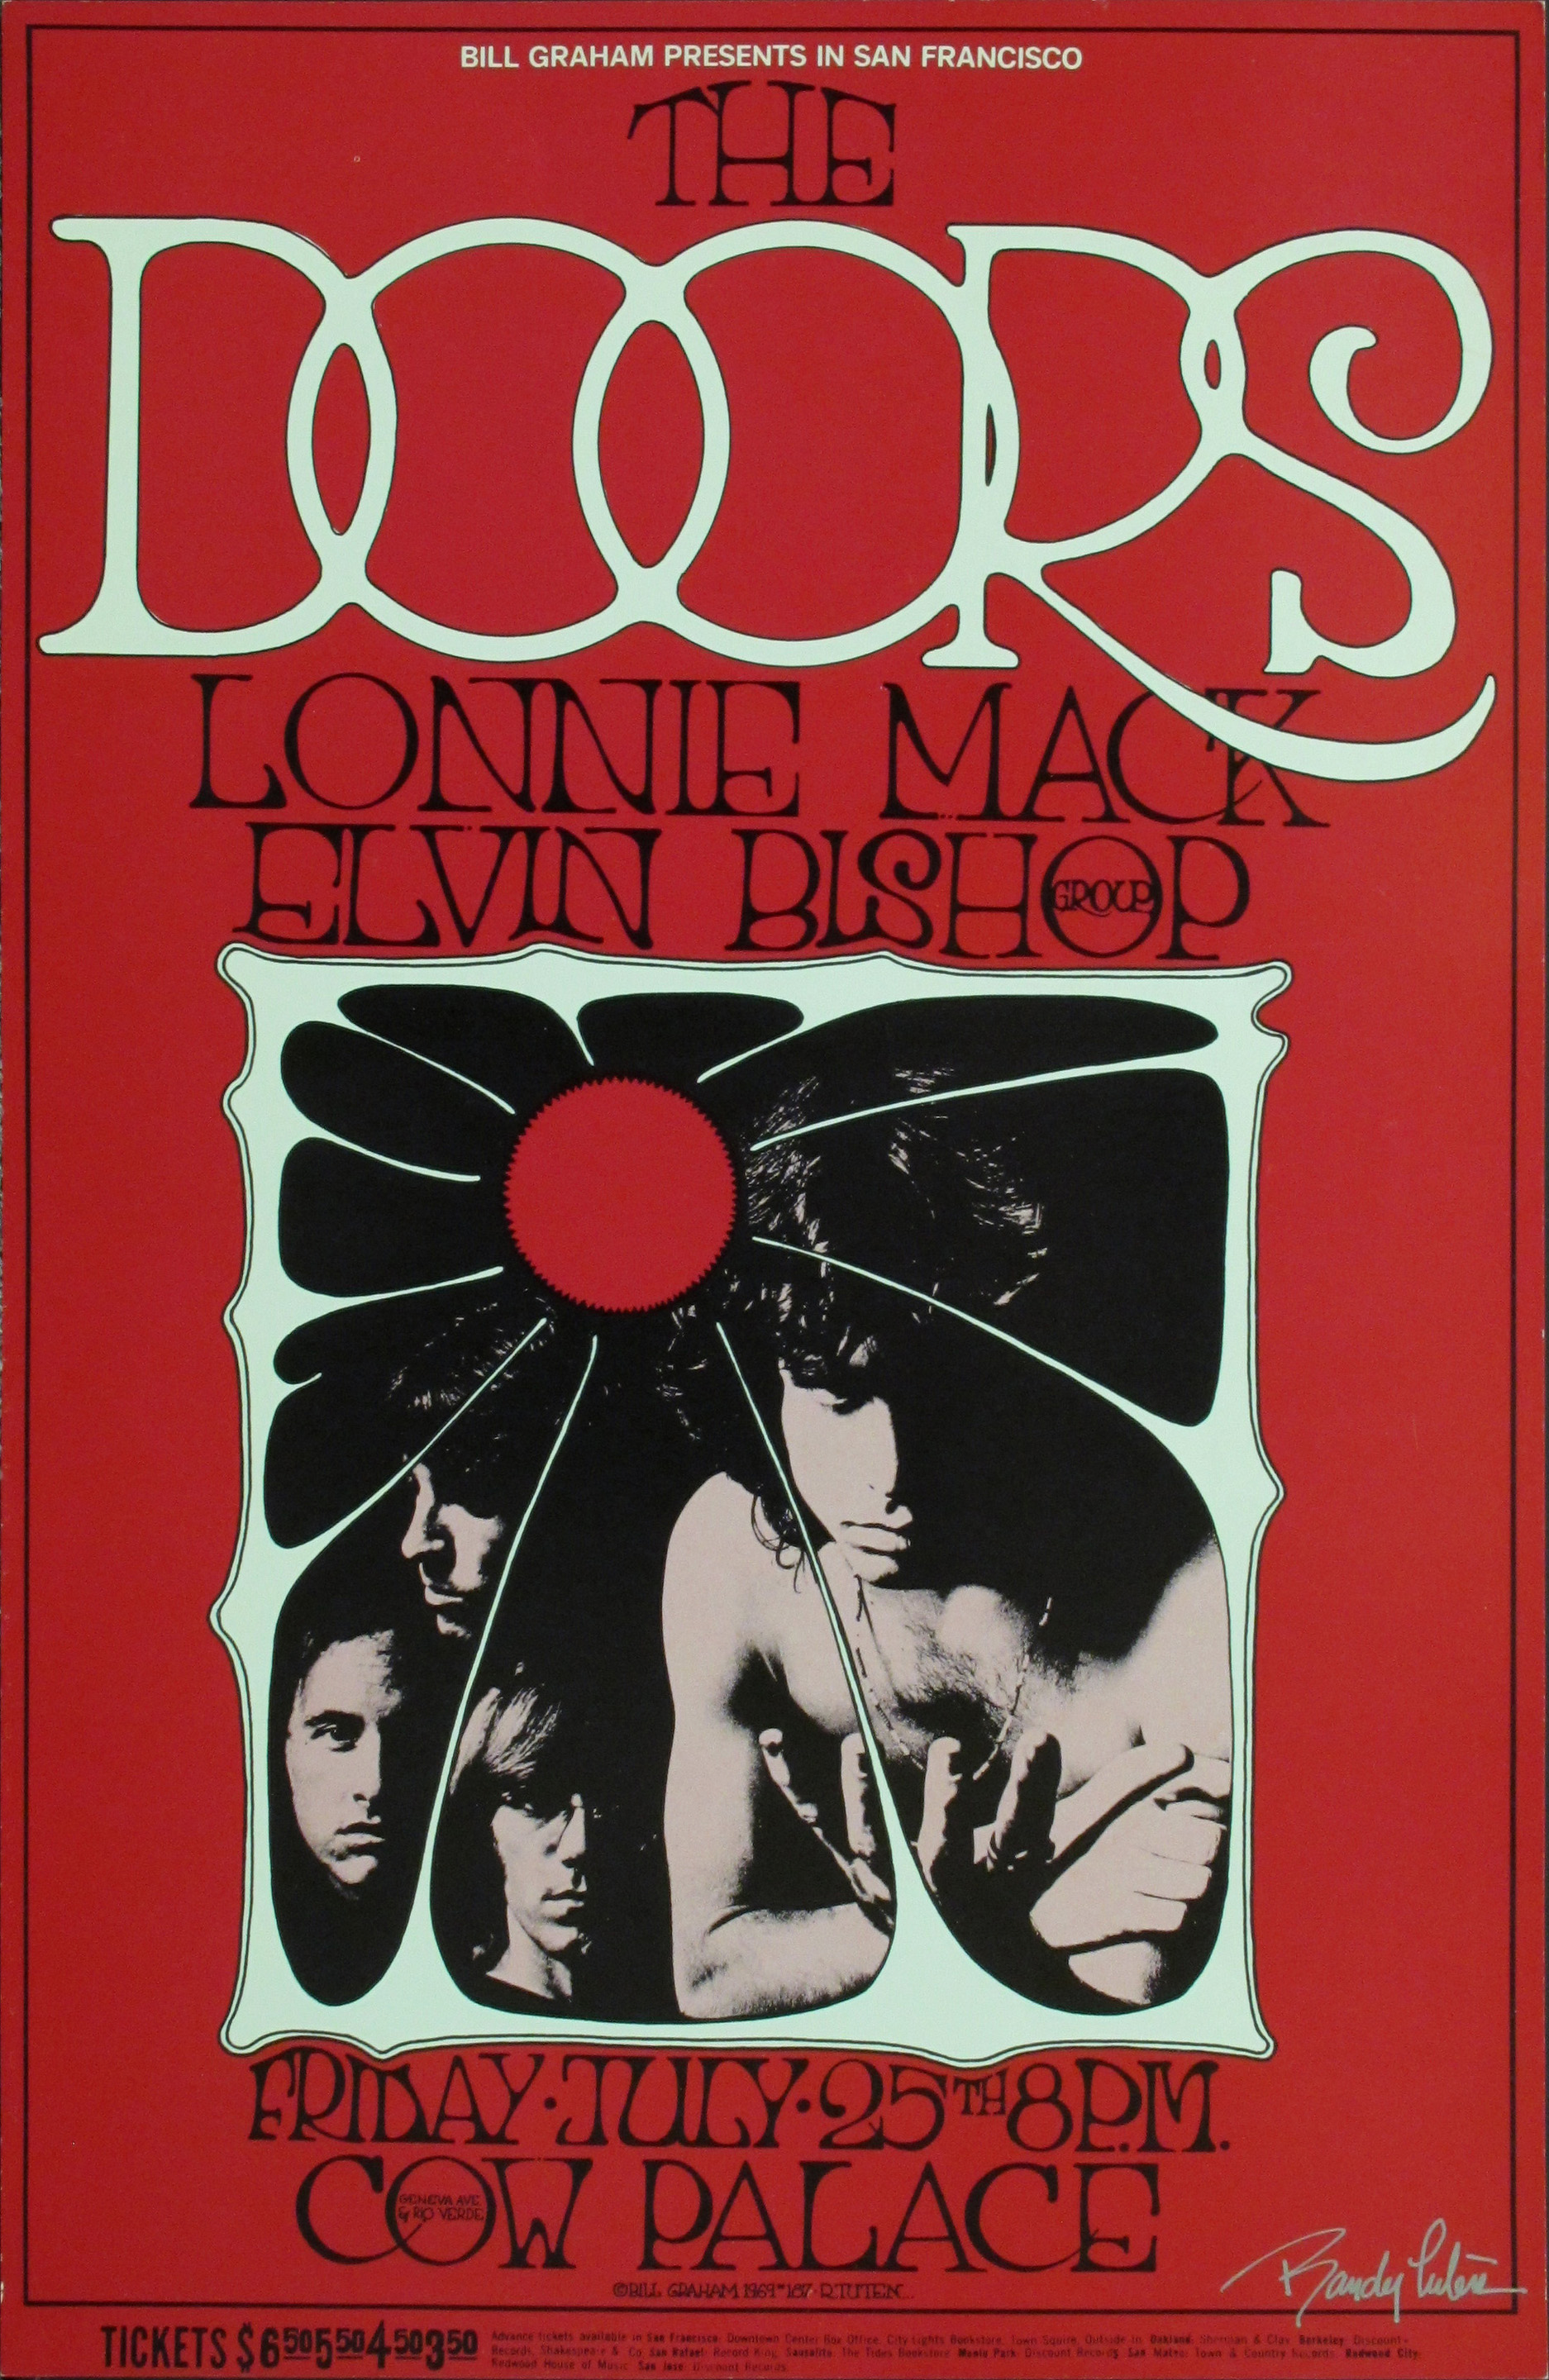 The Doors And Lonnie Mack Original Concert Poster